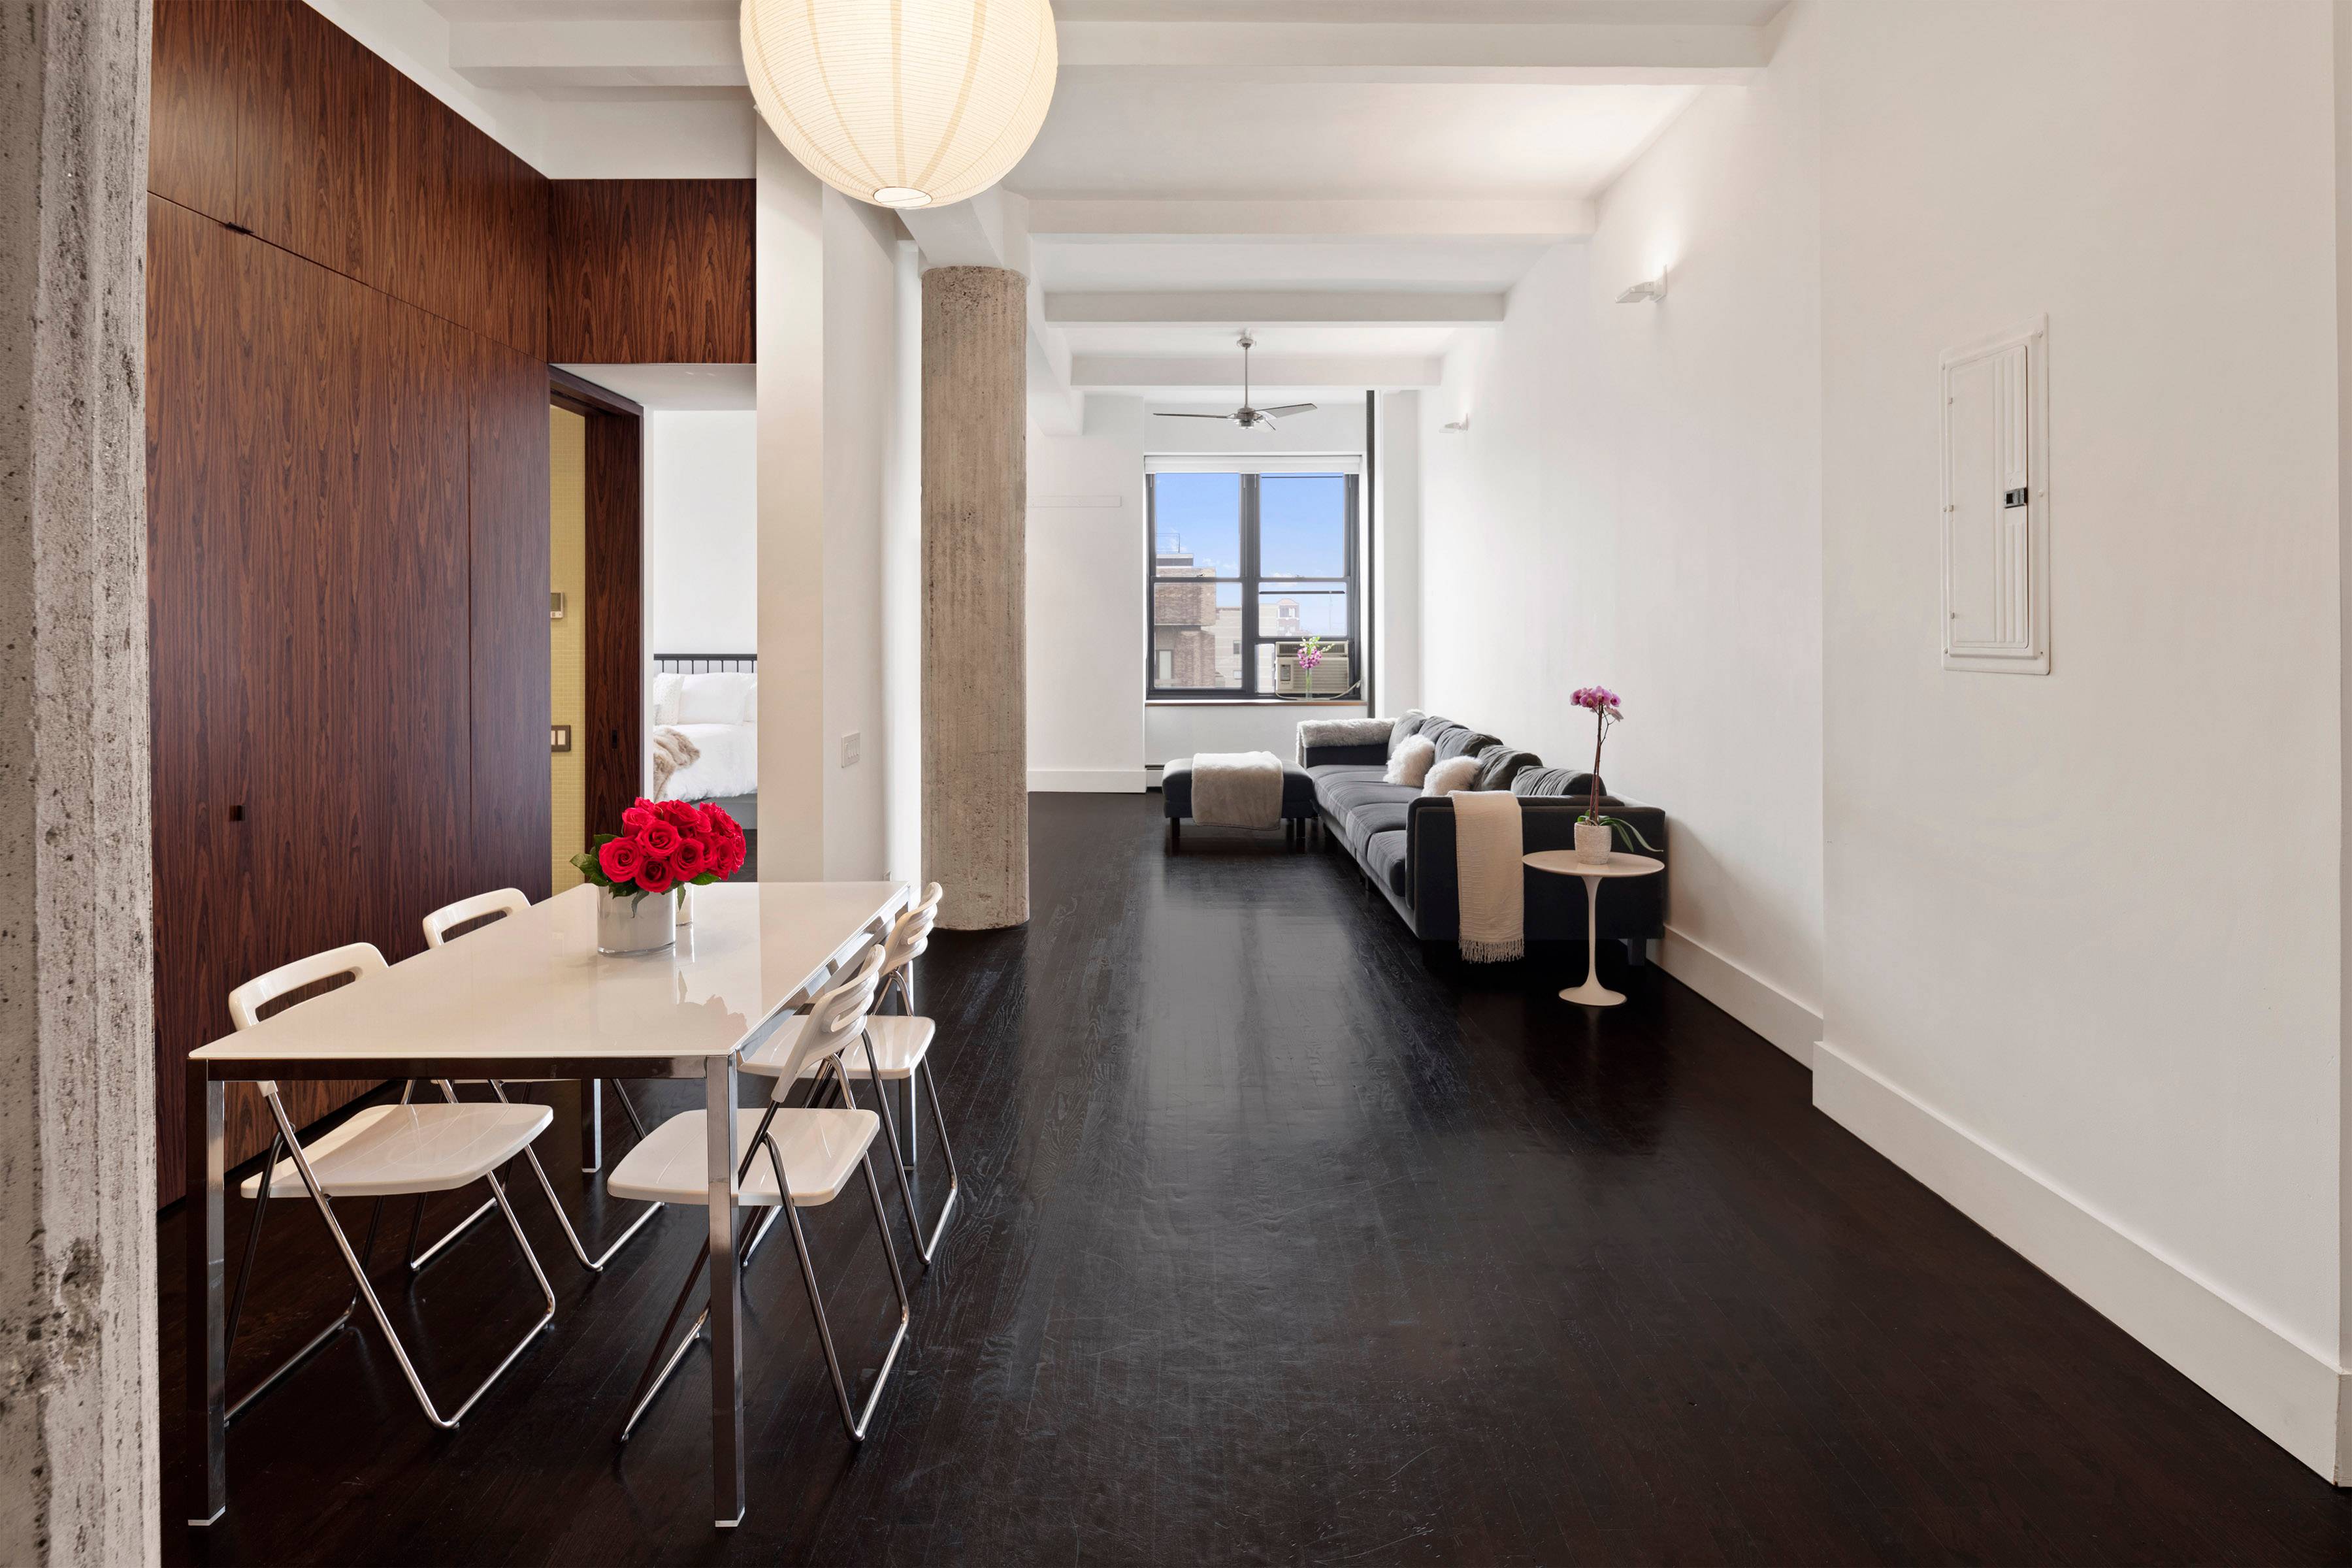 Chic & Stunning Triple Mint High Floor Large Modern One Bedroom Loft  Plus Interior Bedroom & Windowed Home Office with 12 ft Ceilings & Sky Views  in an Iconic Doorman Building in Greenwich Village/Noho